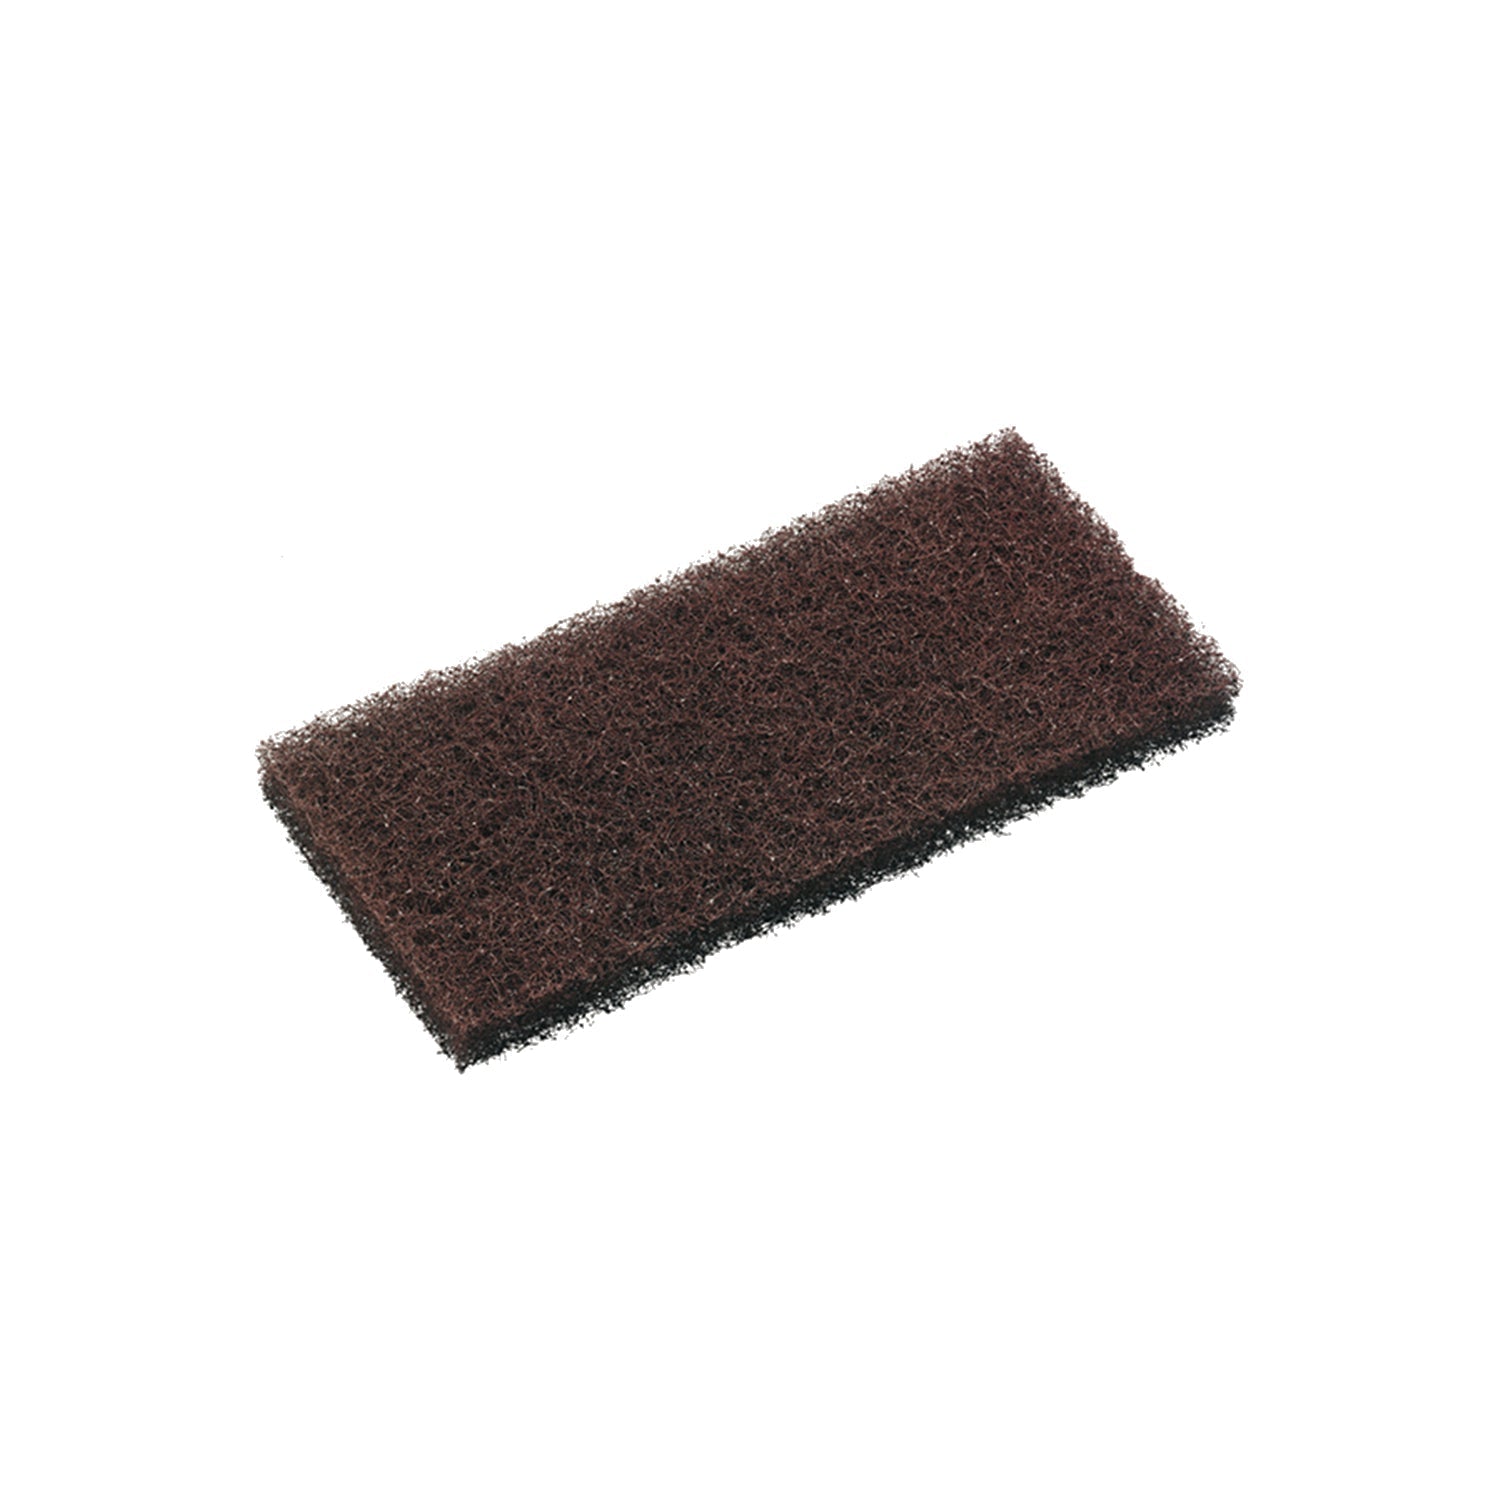 Oates Oates PAD#637 Strip 25X11CM Brown E/B - CT/40 Cleaning & Washroom Supplies  